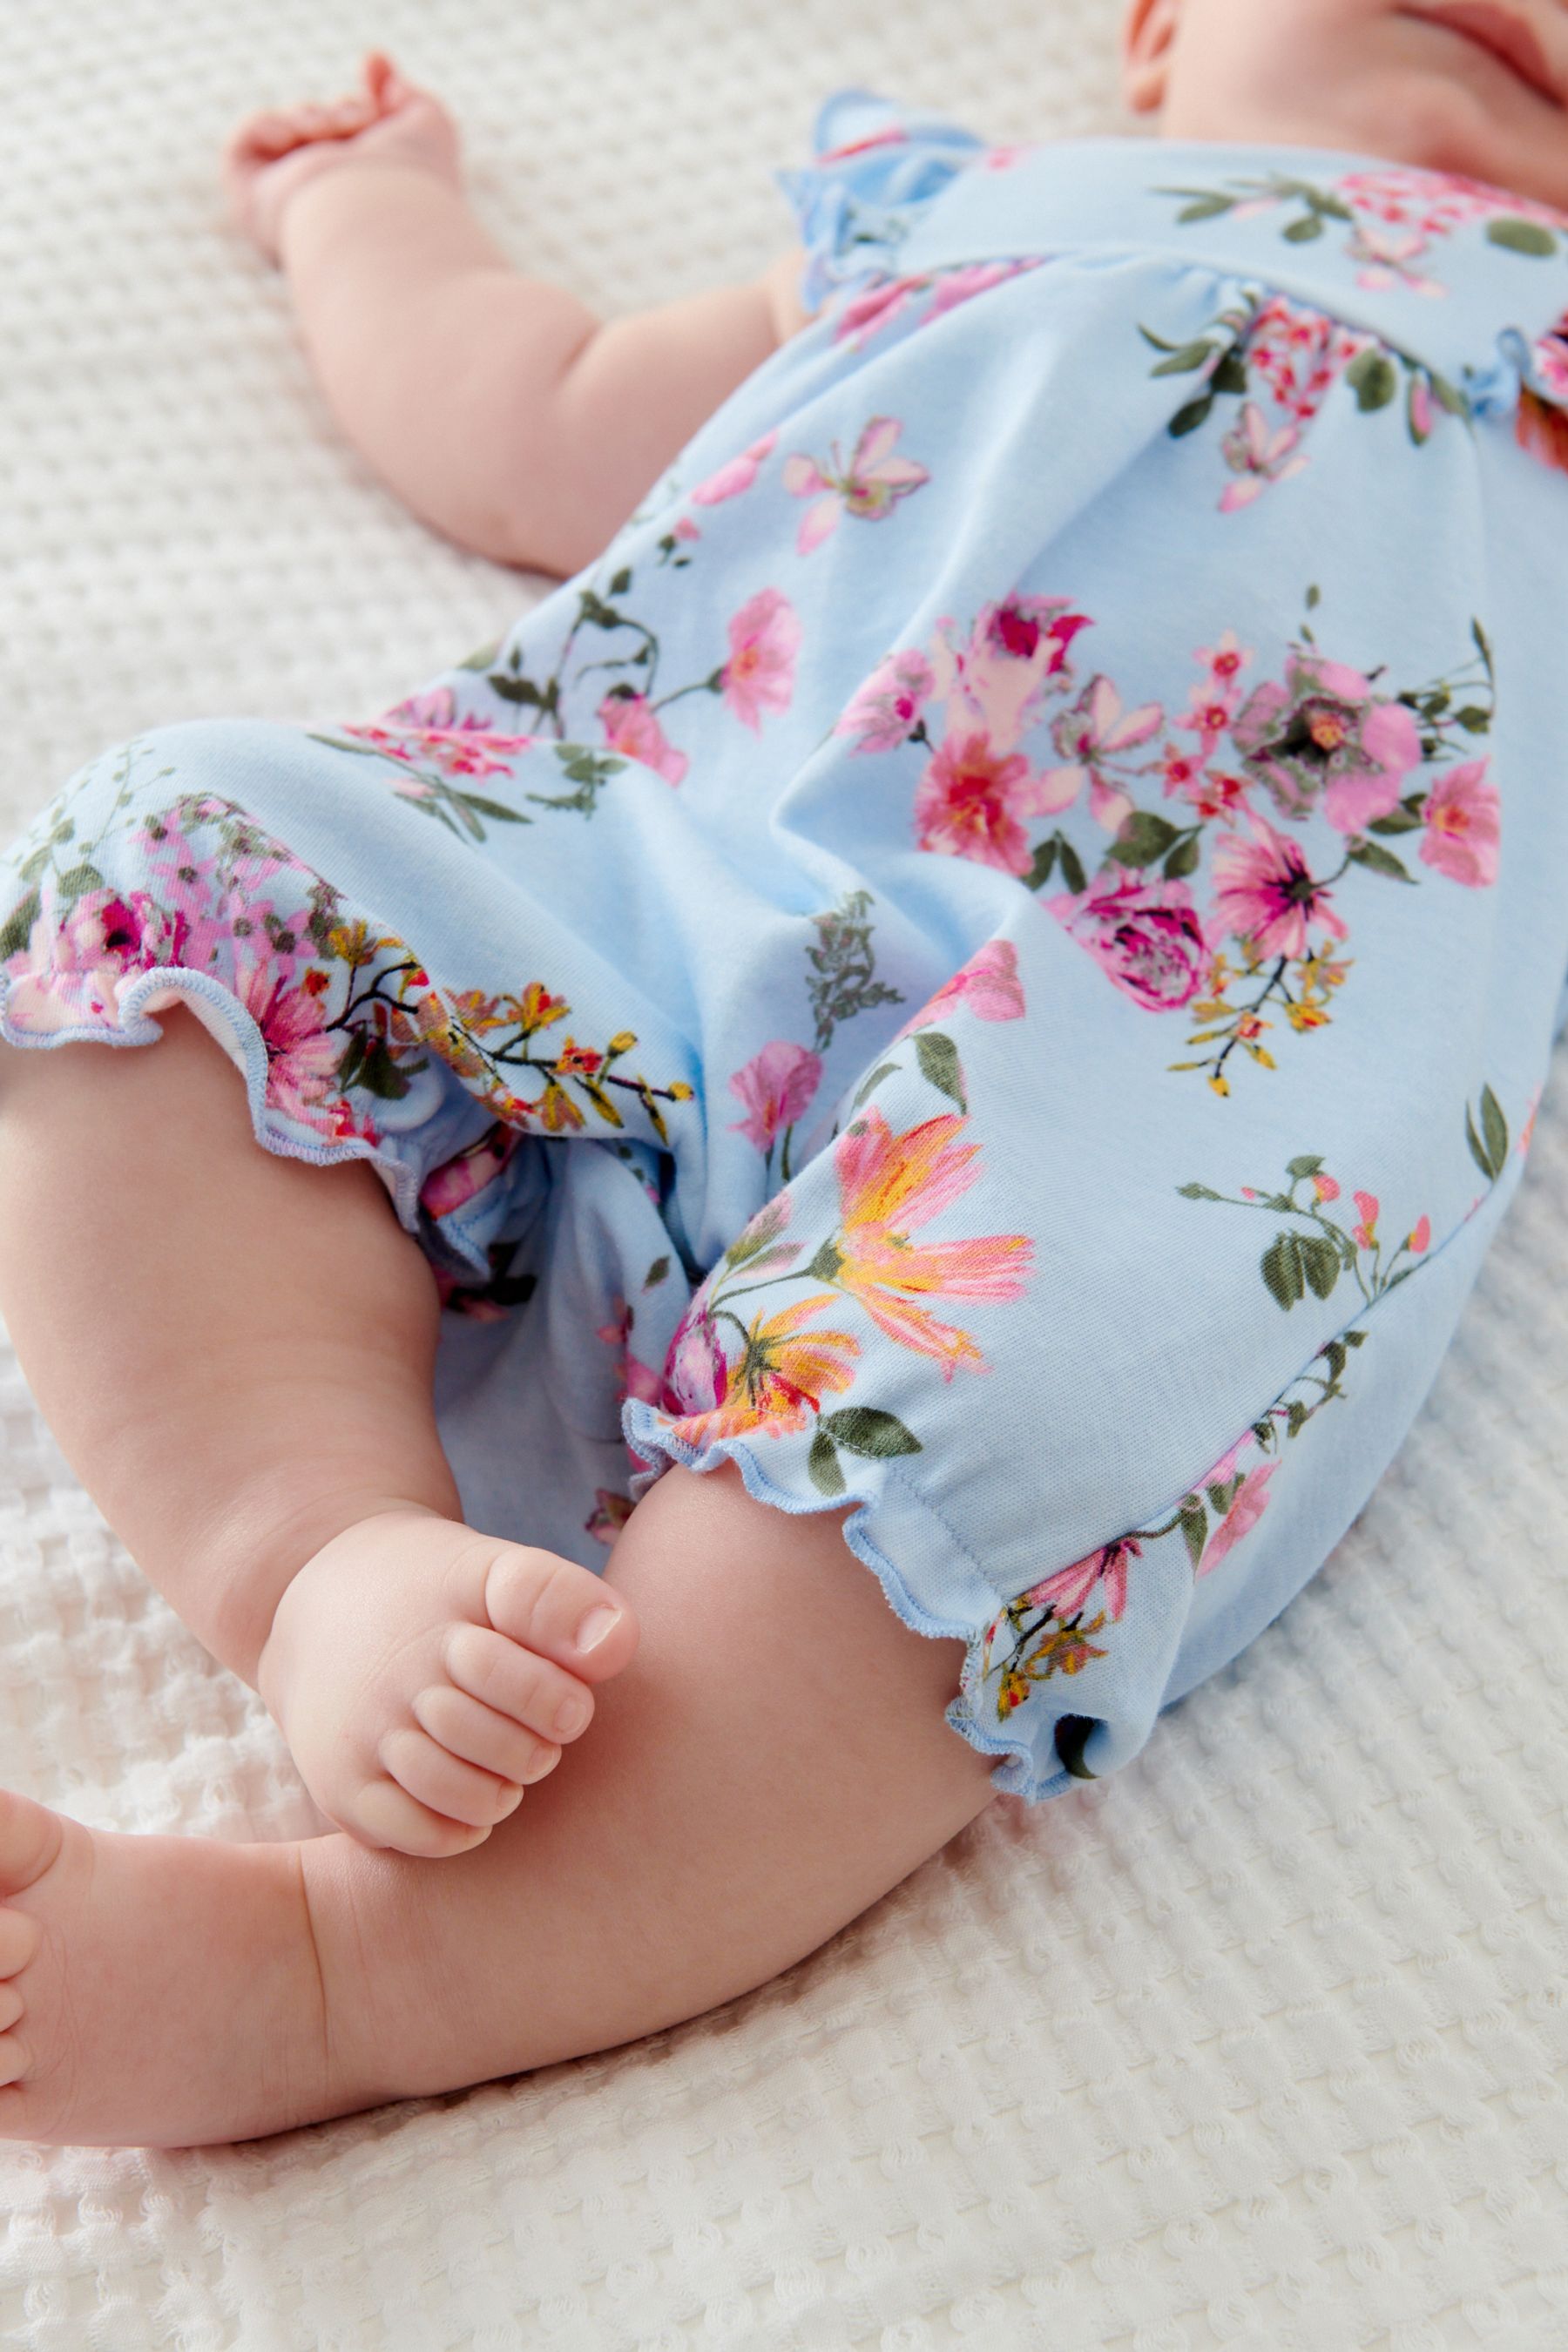 Pink/Blue/White Floral 3 Pack Rompers (0mths-3yrs)